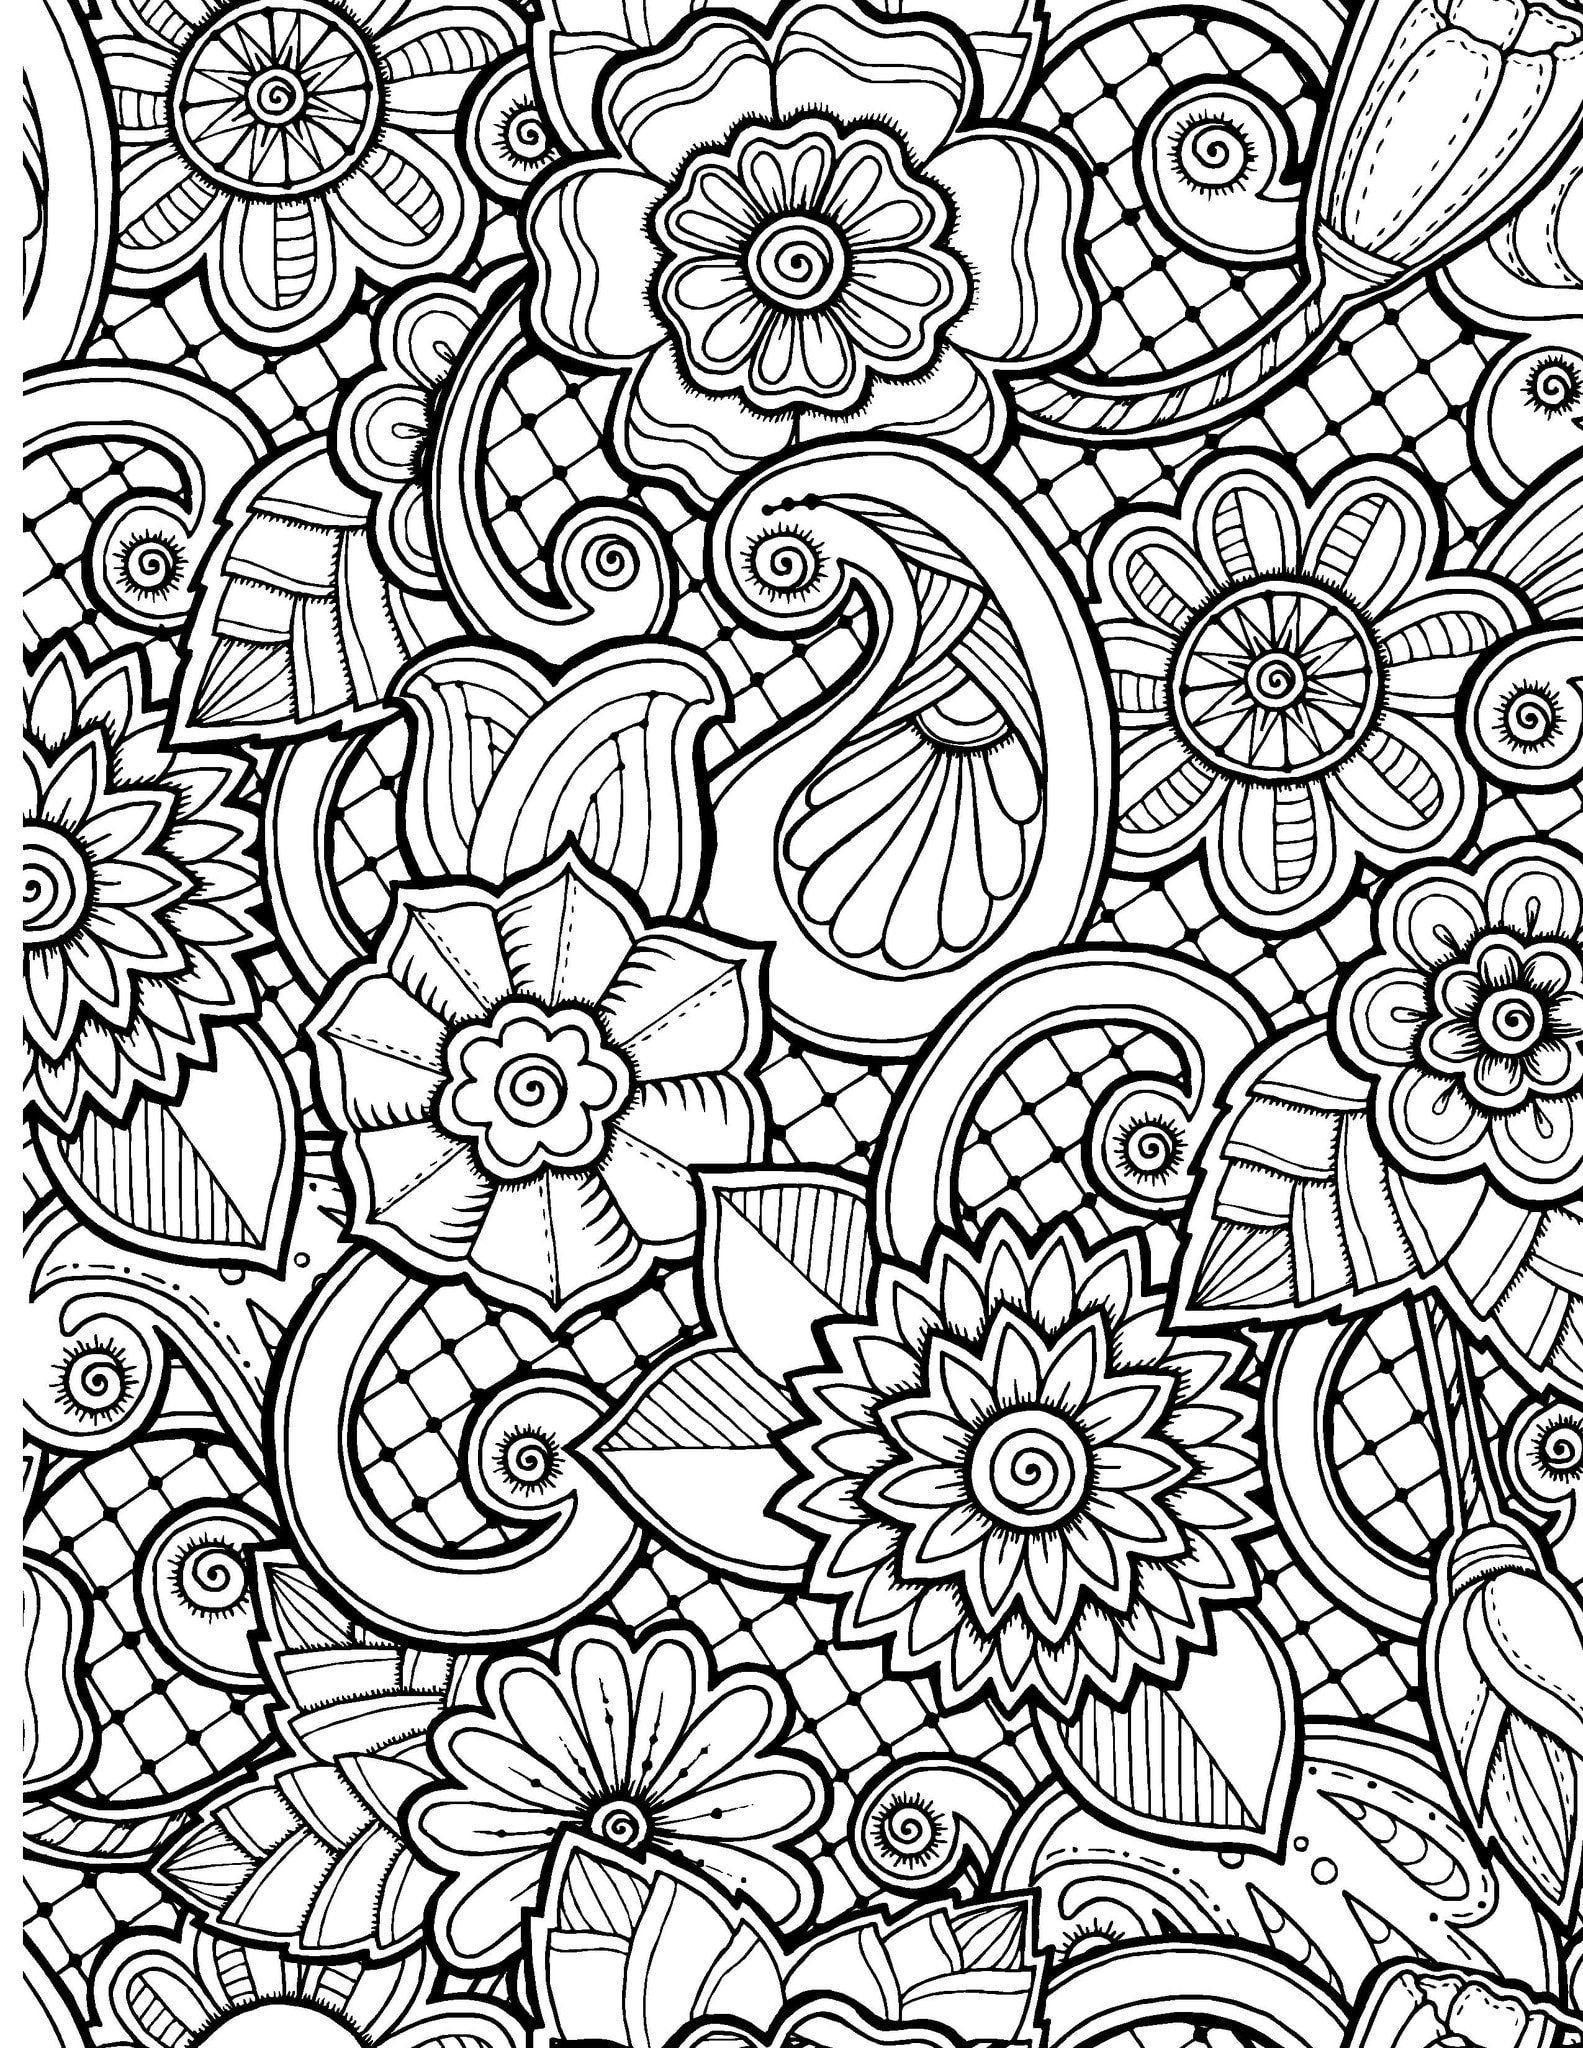 Coloring Pages For Adults Abstract Flowers
 Most everyone loves to flowers sometimes and coloring